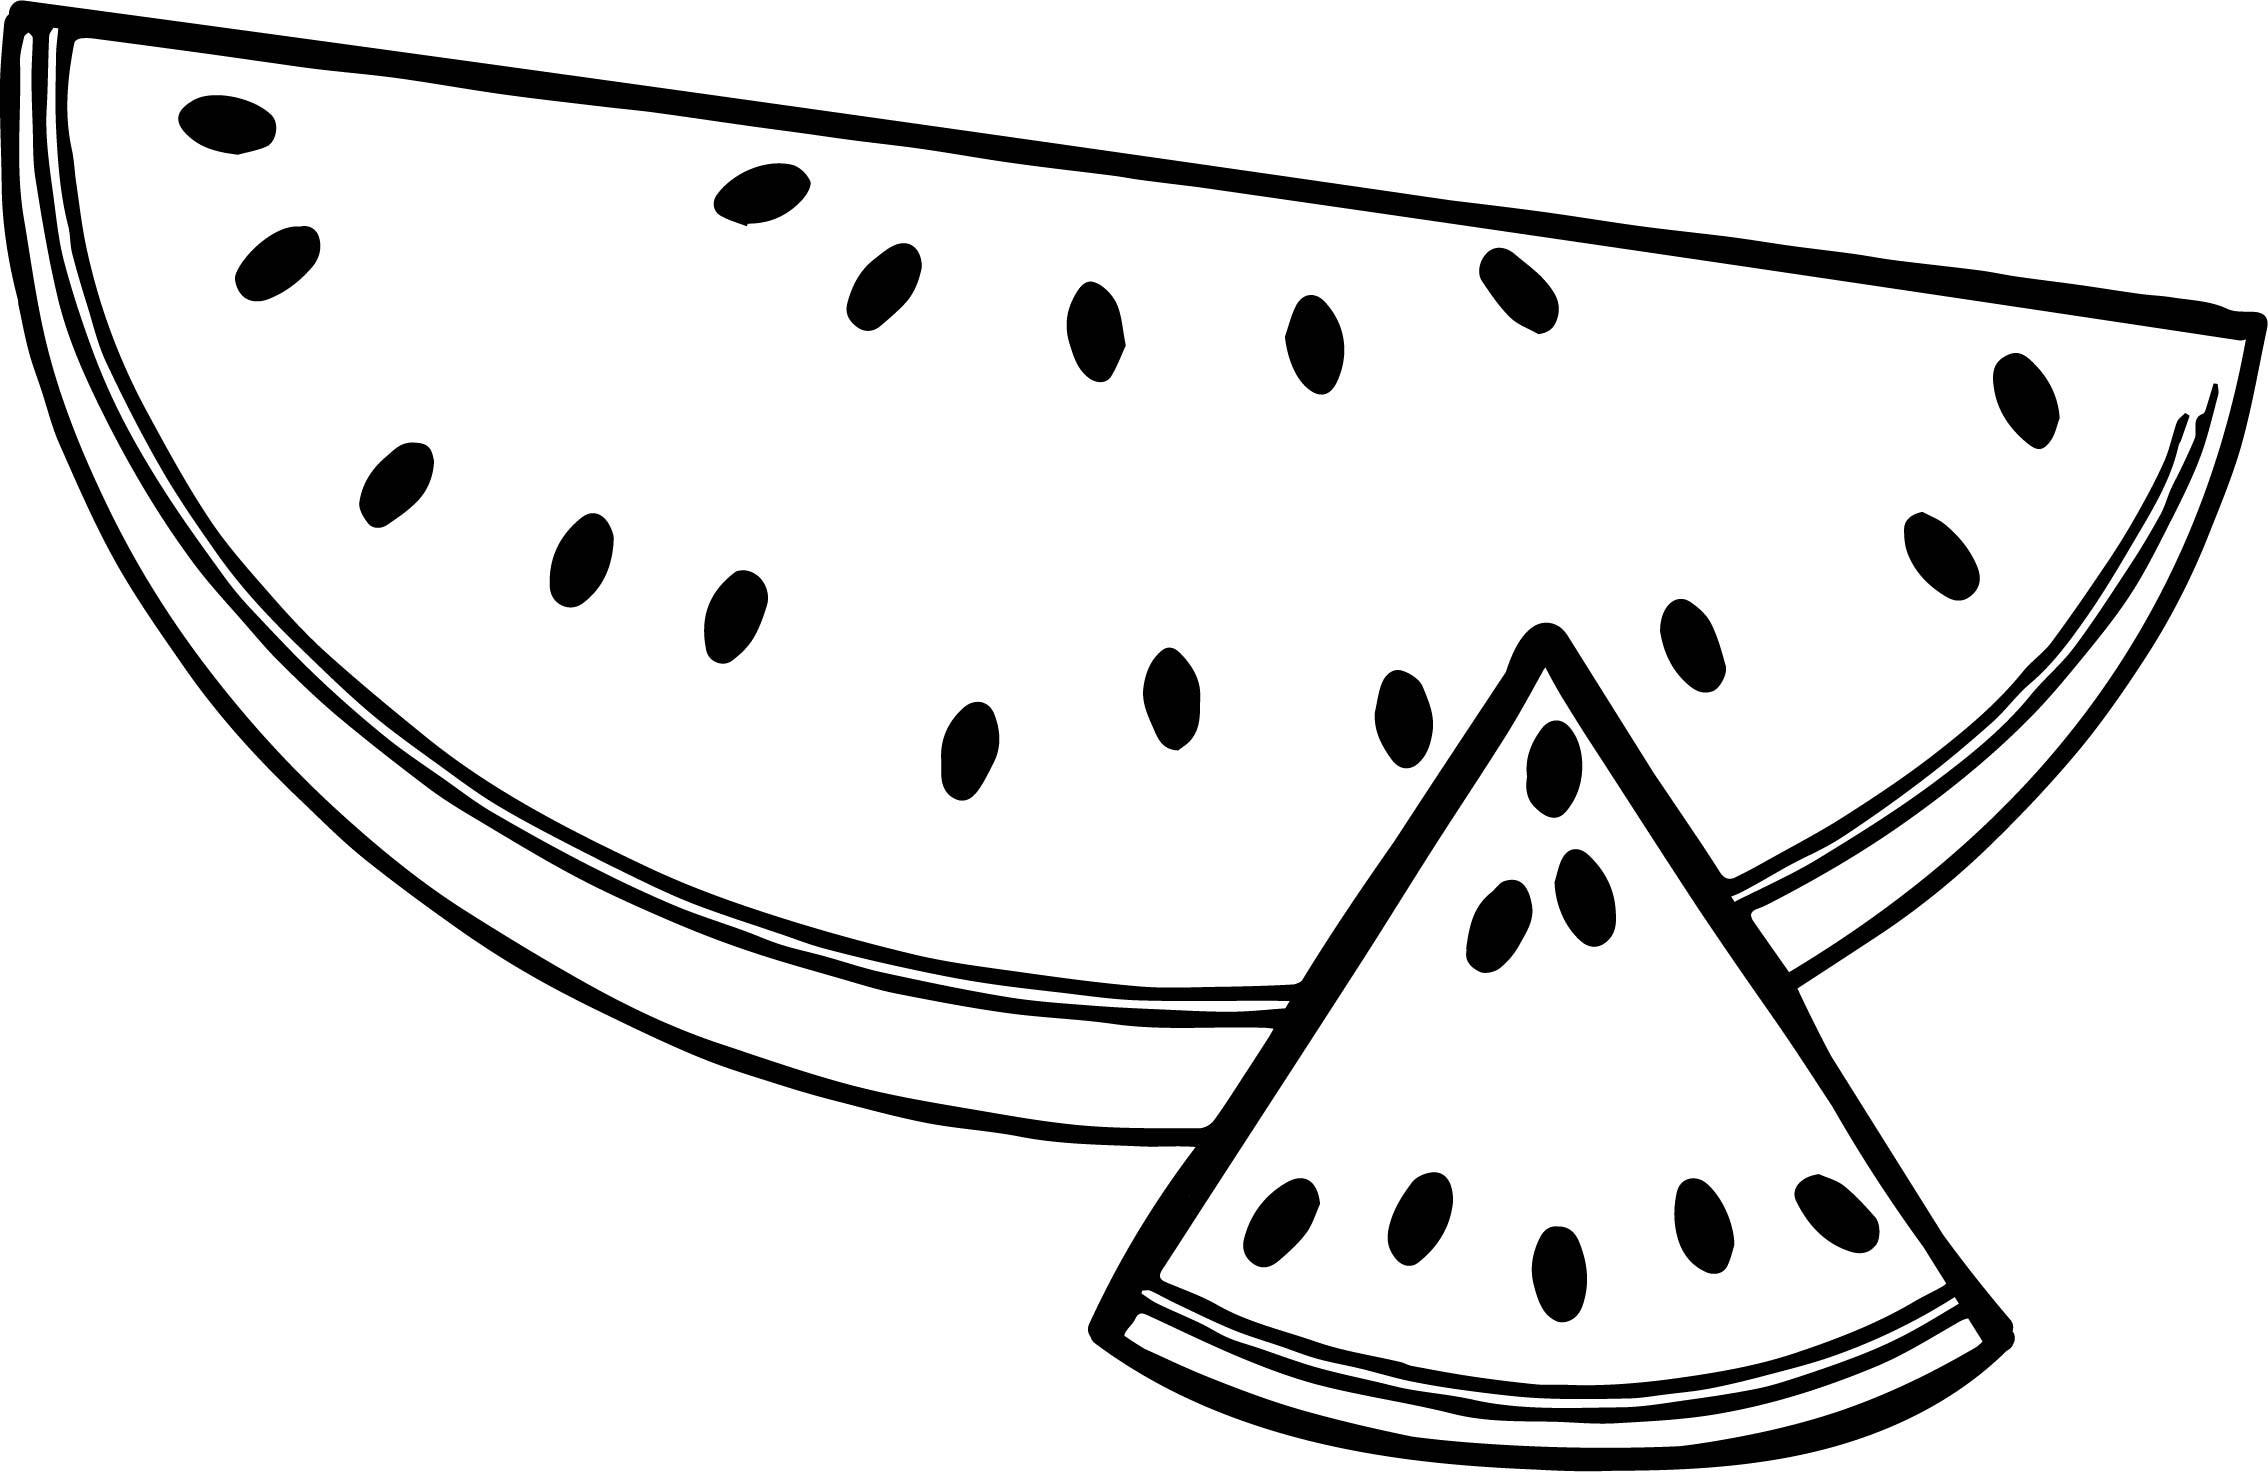 Watermelon Coloring Page at Free printable colorings